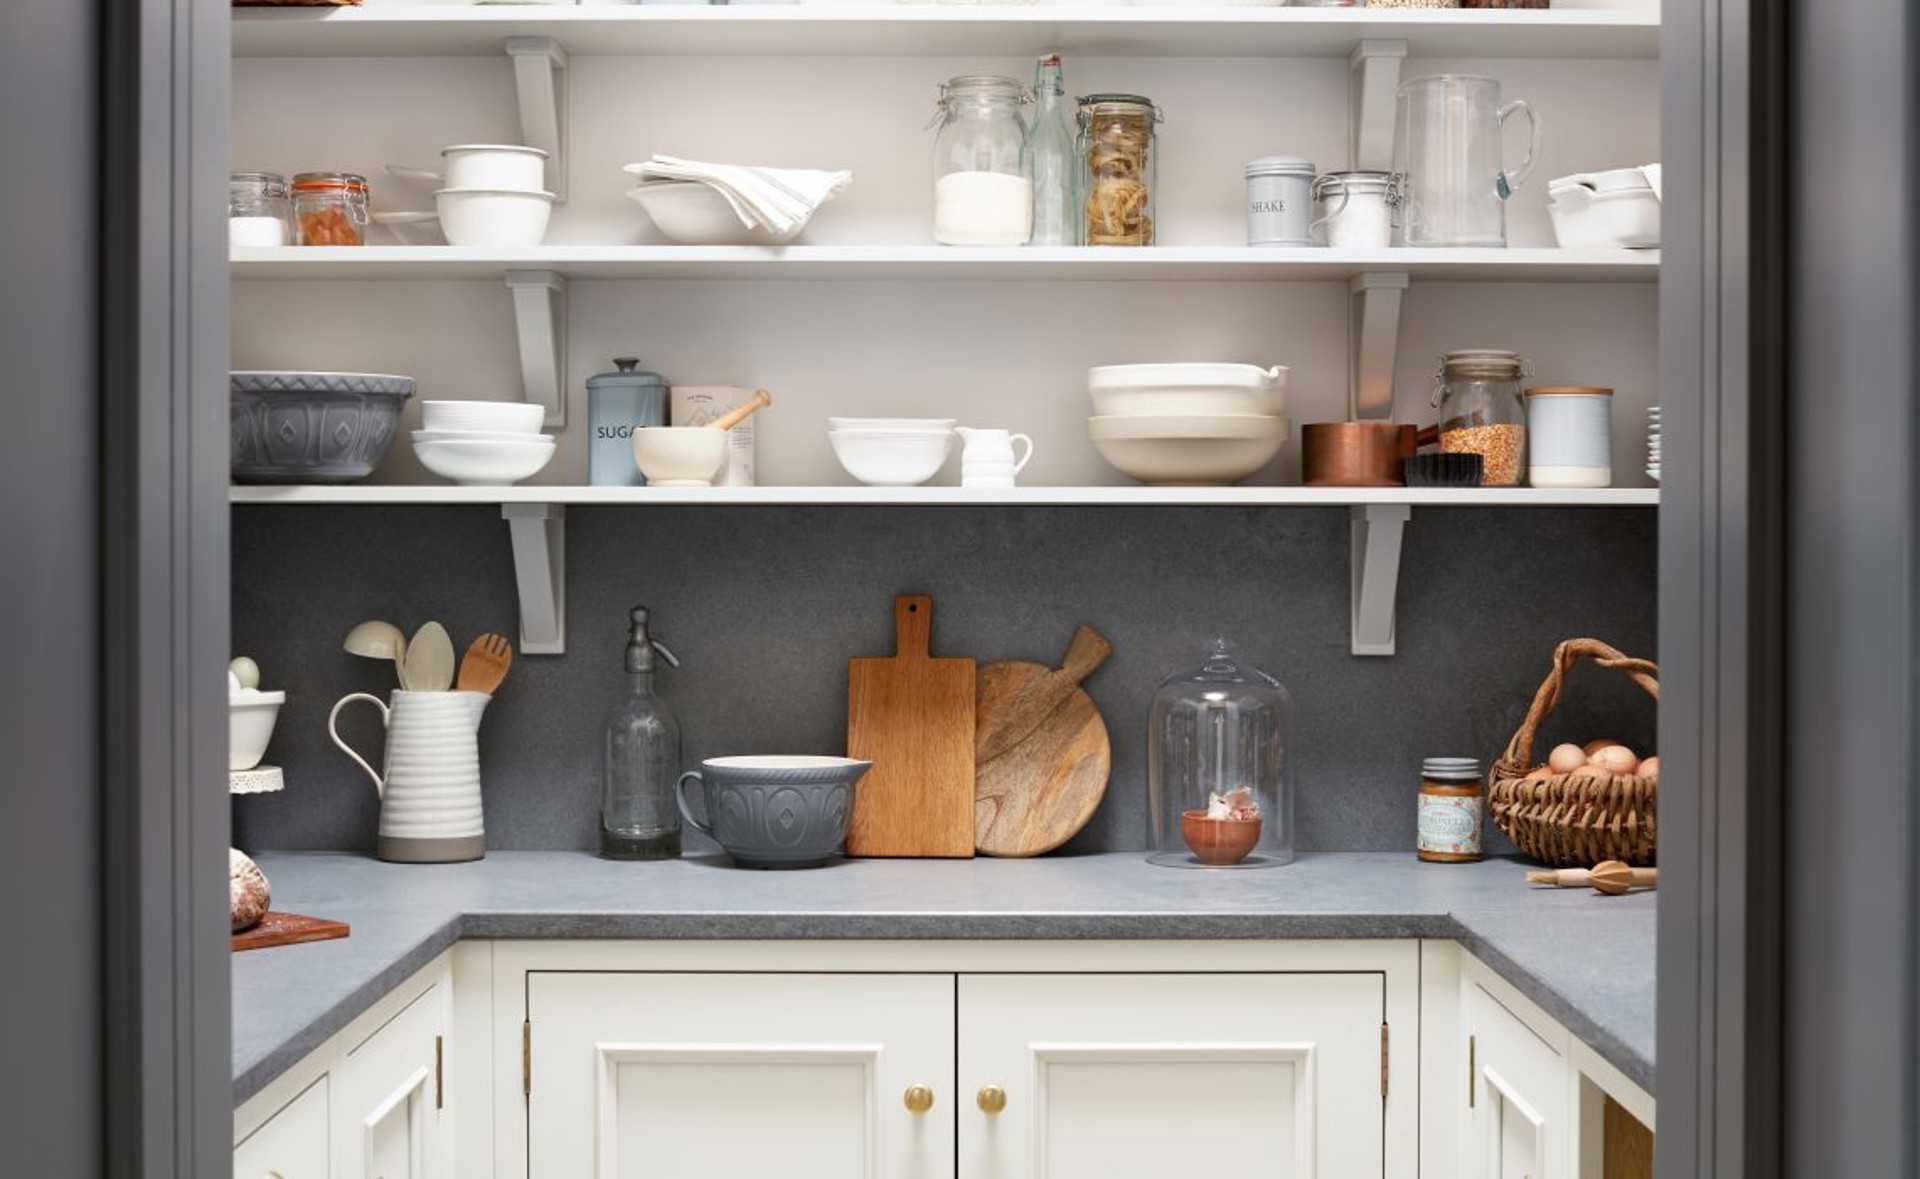 How to style open shelving in the kitchen